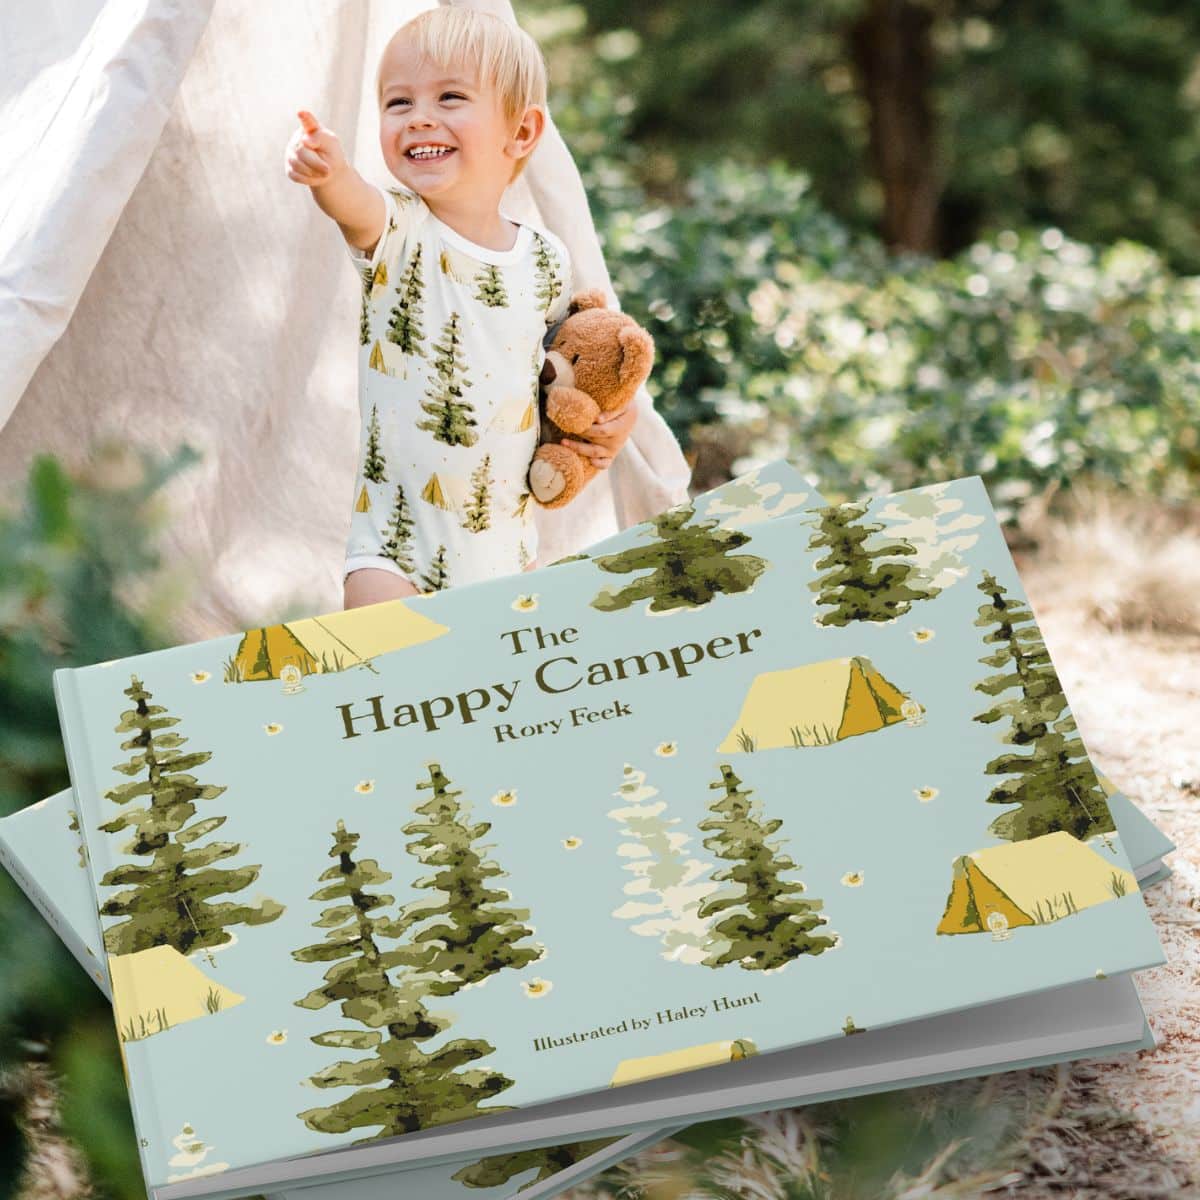 https://milkbarnkids.com/wp-content/uploads/2022/08/The-Happy-Camper-by-Rory-Feek-Book-Image.jpg